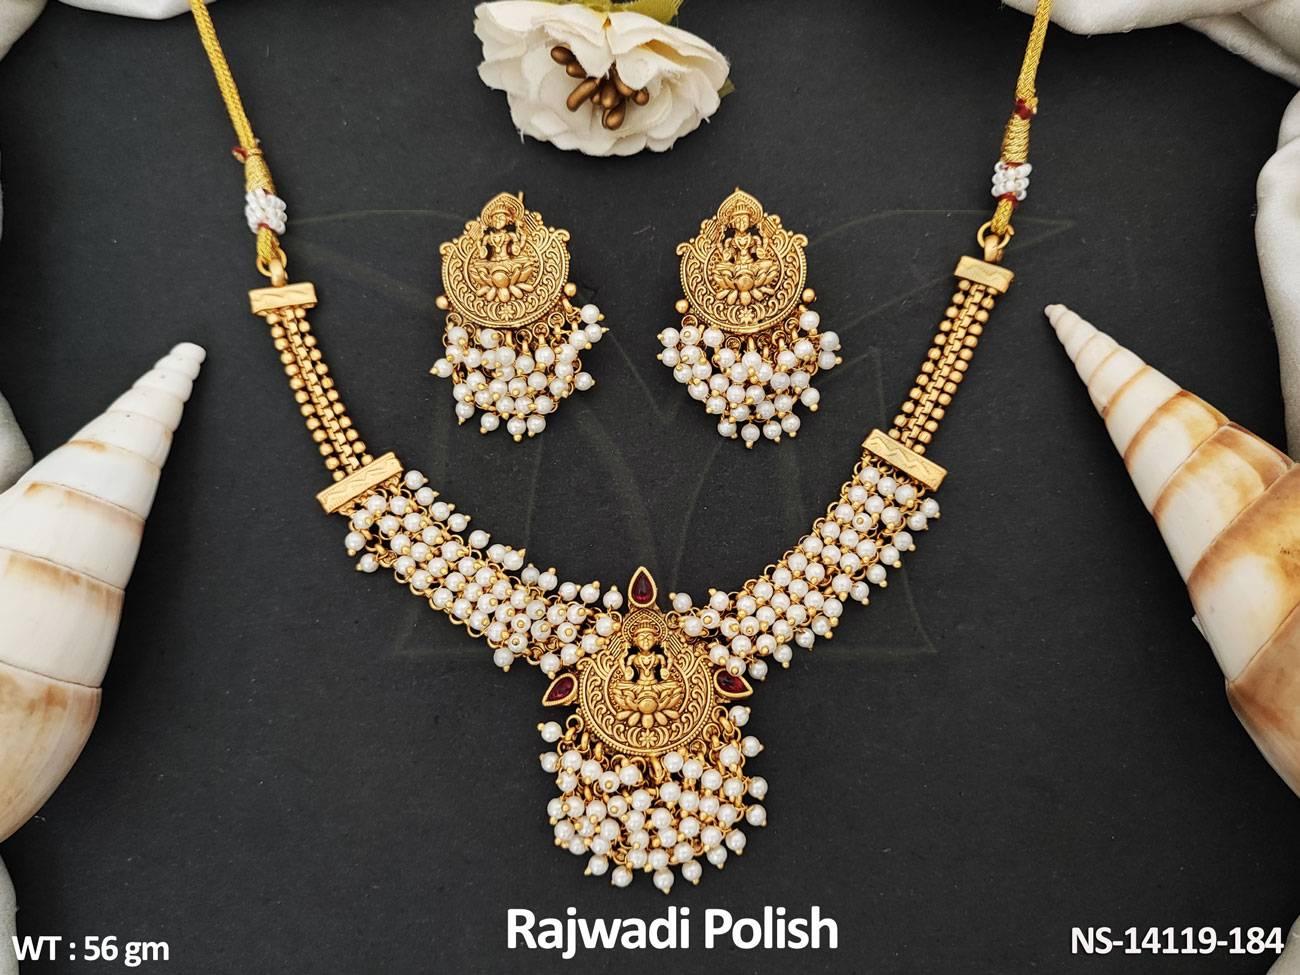 Rajwadi Polish Party Wear Fancy Temple Necklace Set features a traditional South Indian design with intricate detailing that will add a unique touch to any ensemble.